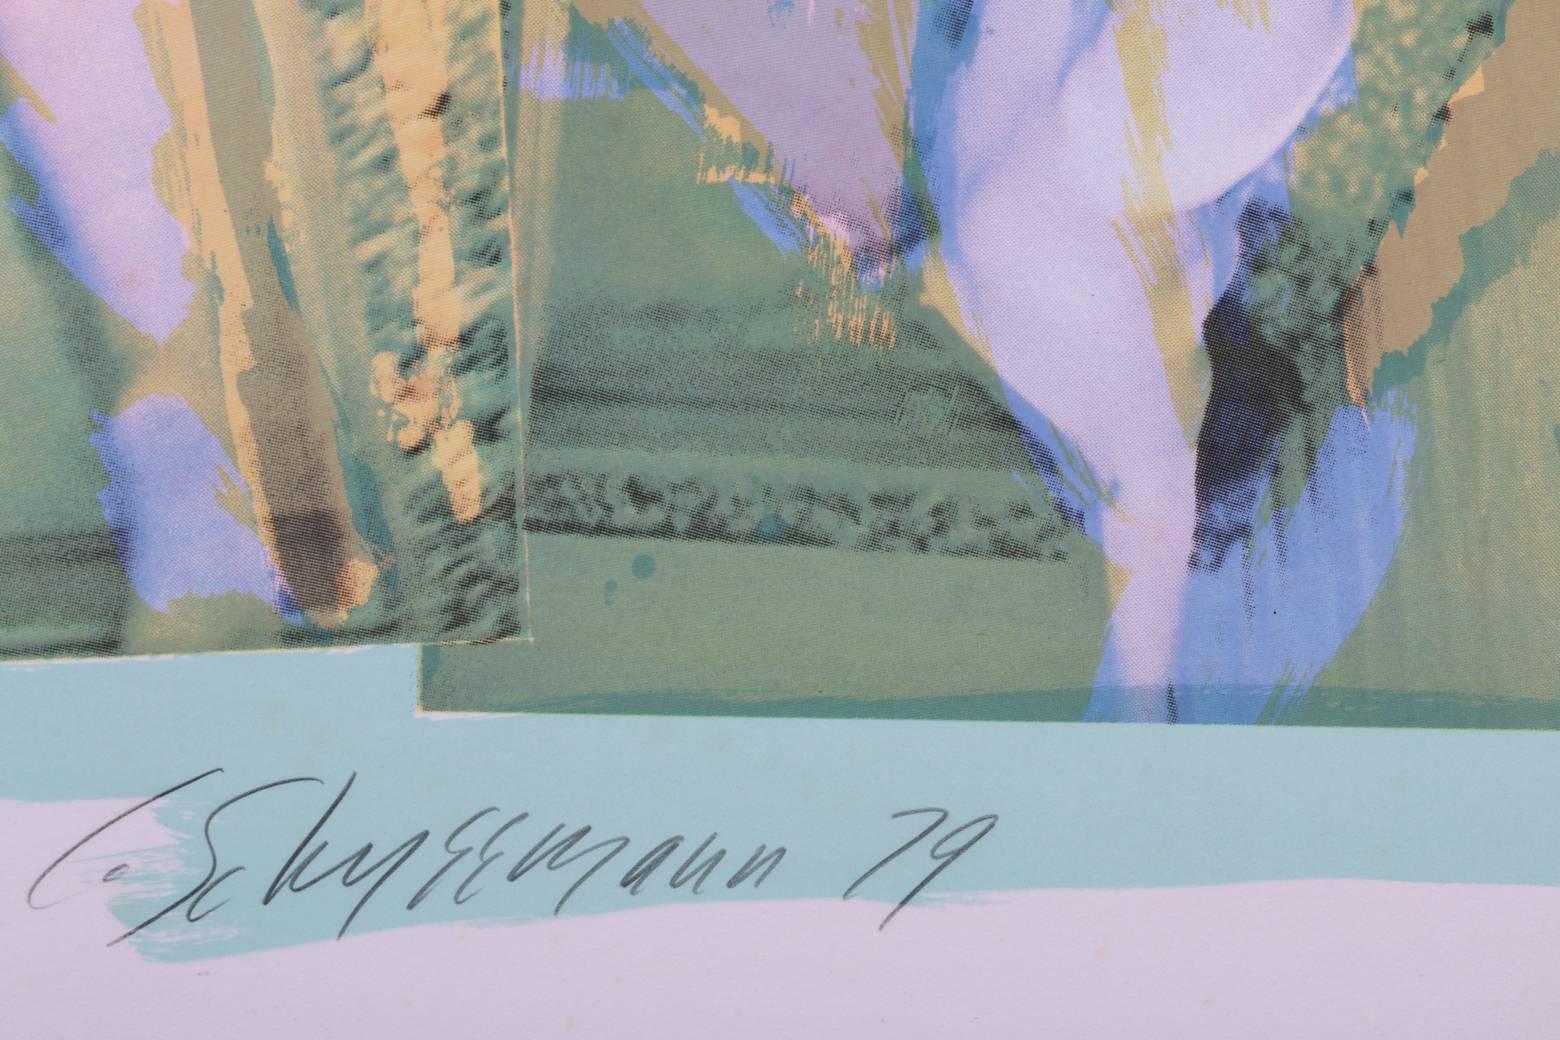 Original kinetic, feminist graphic artwork by Carolee Schneemann featuring Carolee Schneemann lounging in nude display. This limited edition artwork is numbered 56/250. Aqua green border surrounds and separates six vibrant color images of the